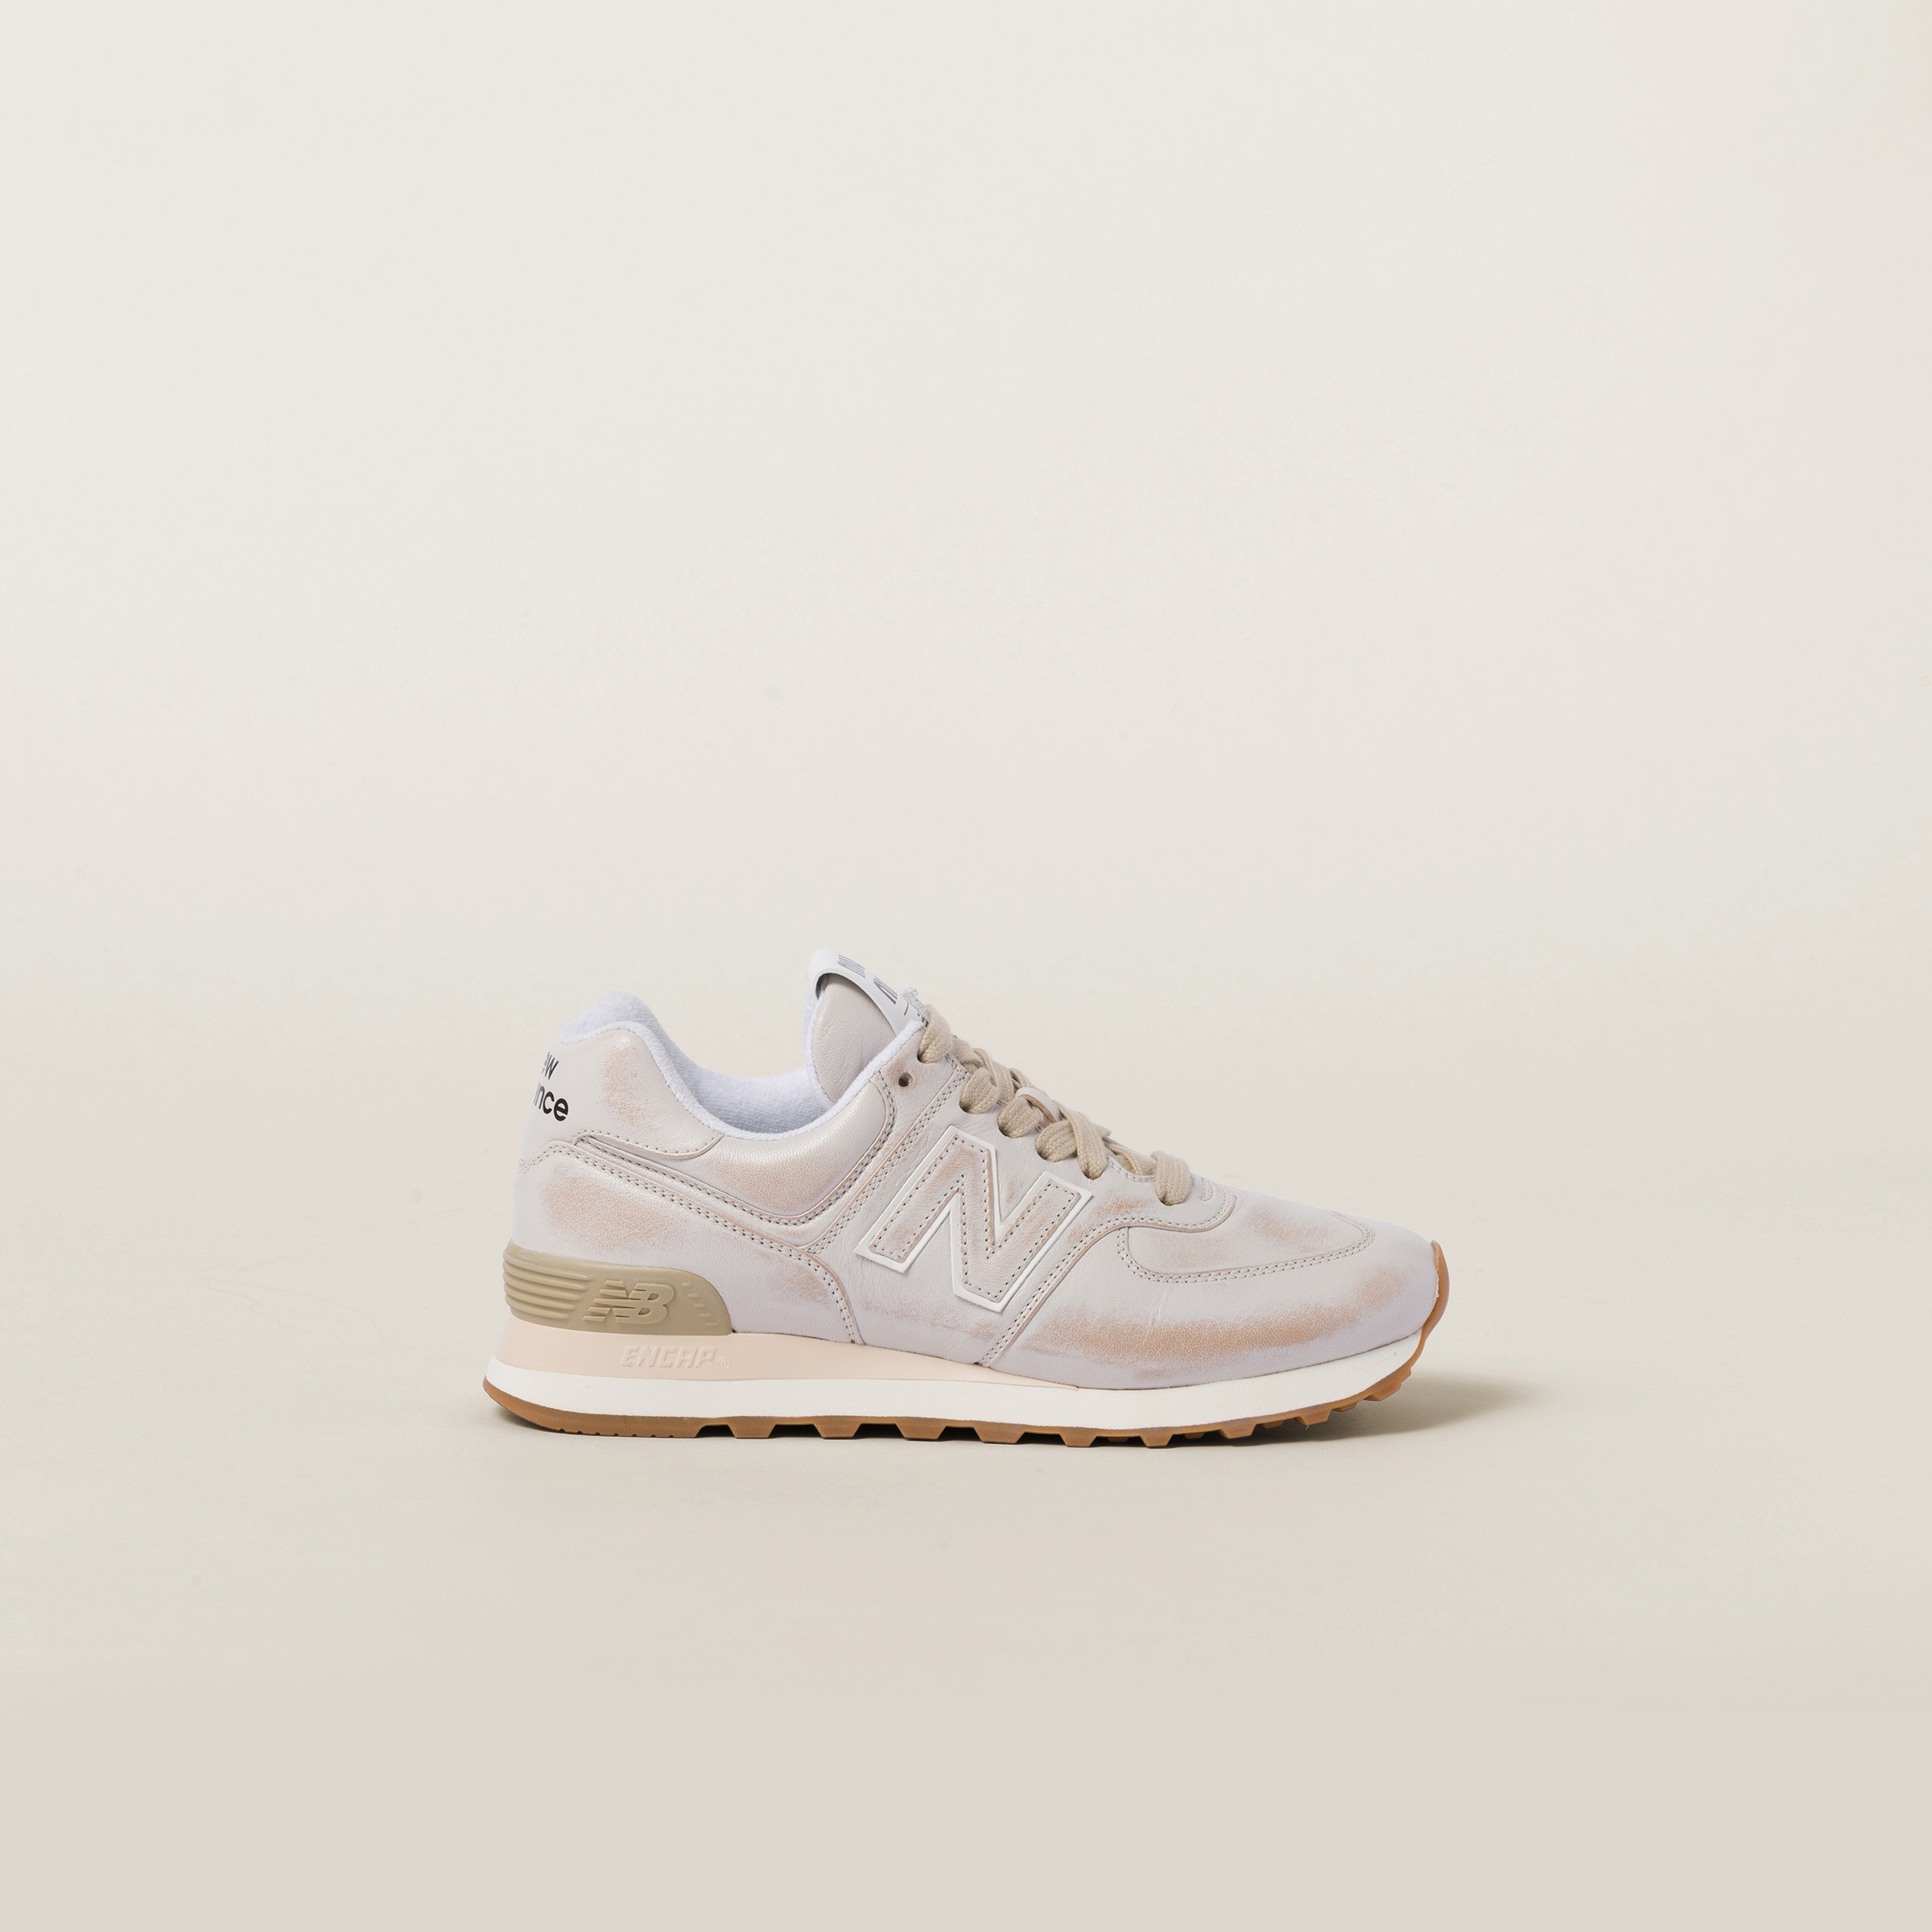 Miu Miu & New Balance's 574 sneaker collaboration with soft velvet & distressed leather uppers